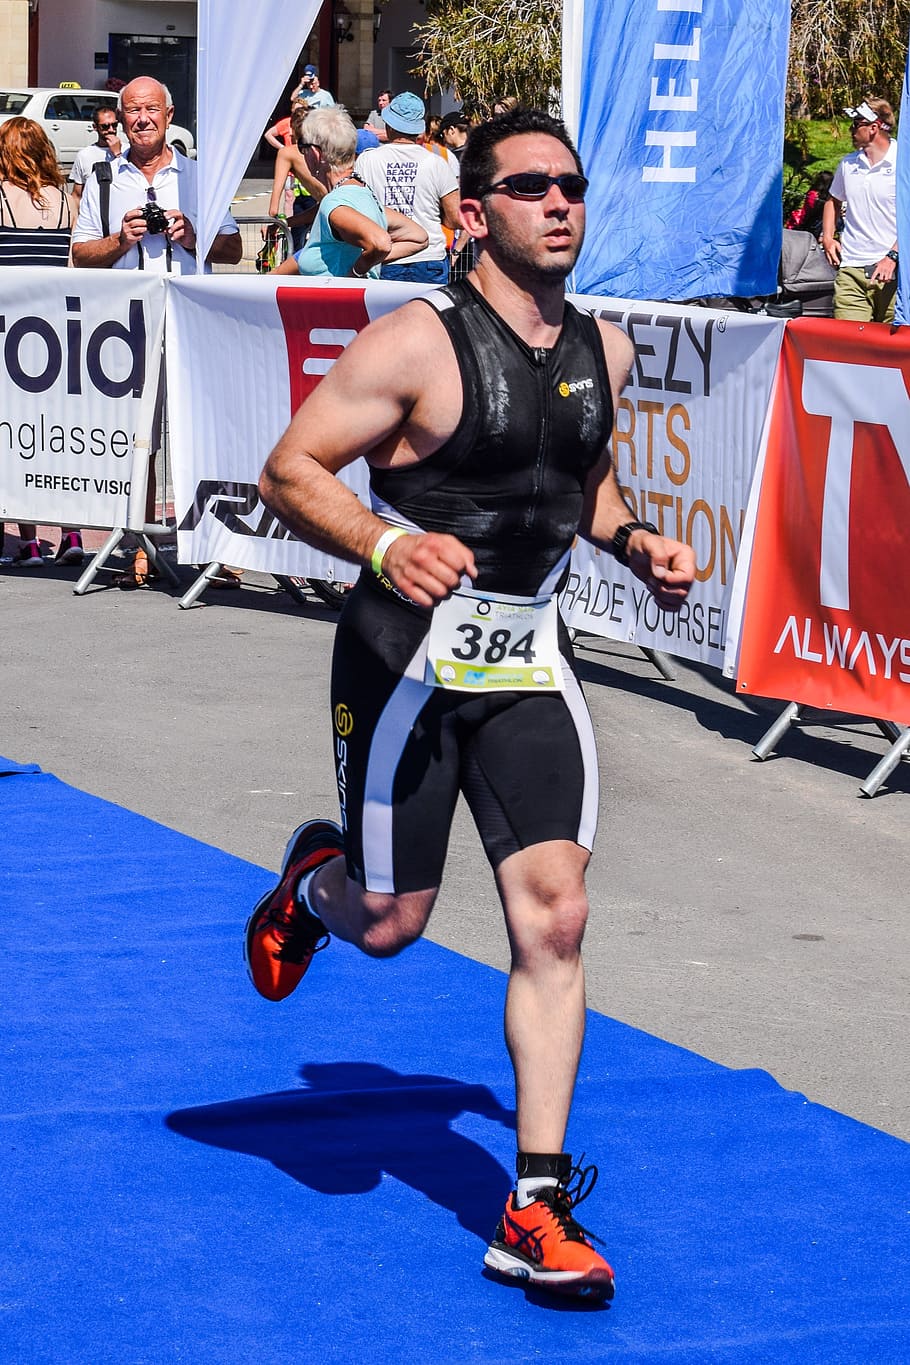 Triathlon, Sport, Competition, Athlete, sport, competition, race, fitness, running, runner, contest